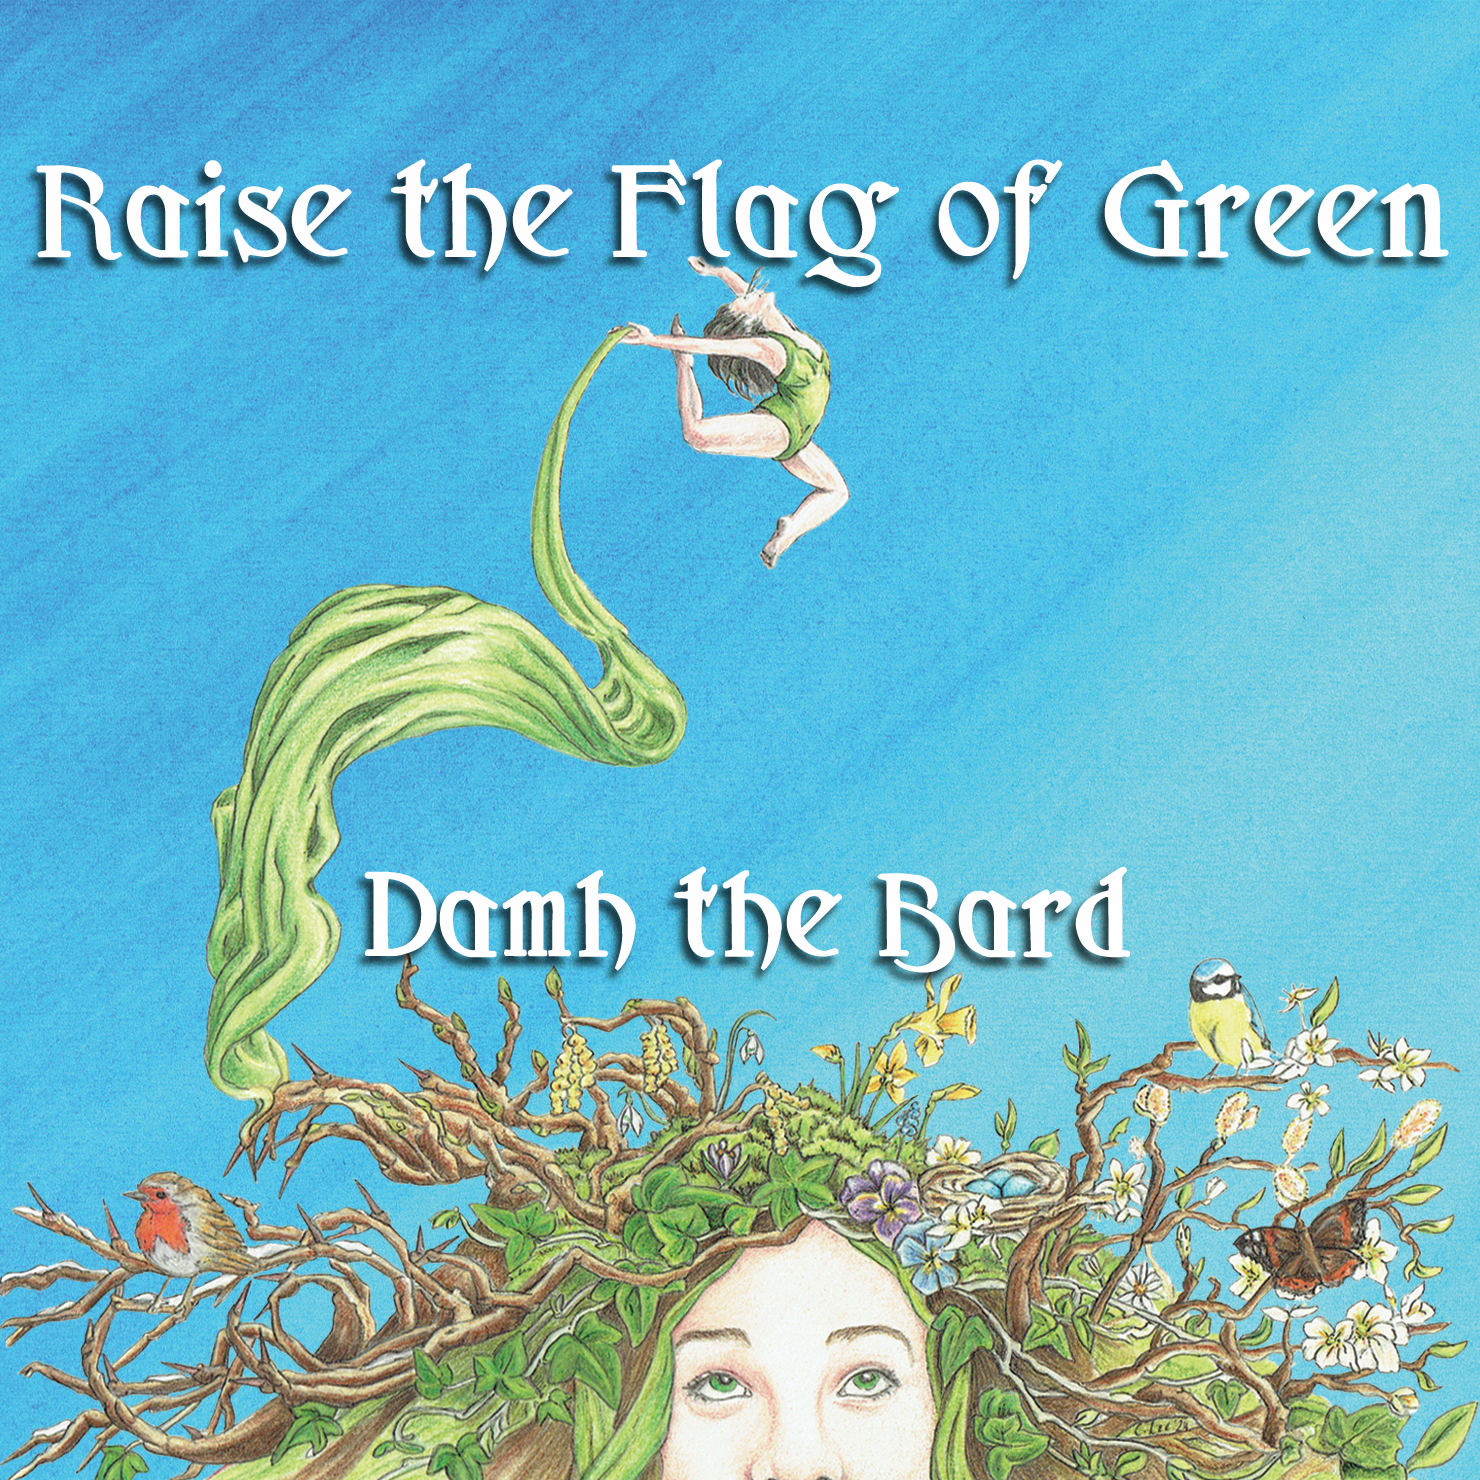 Album pre-orders are now open – Raise the Flag of Green